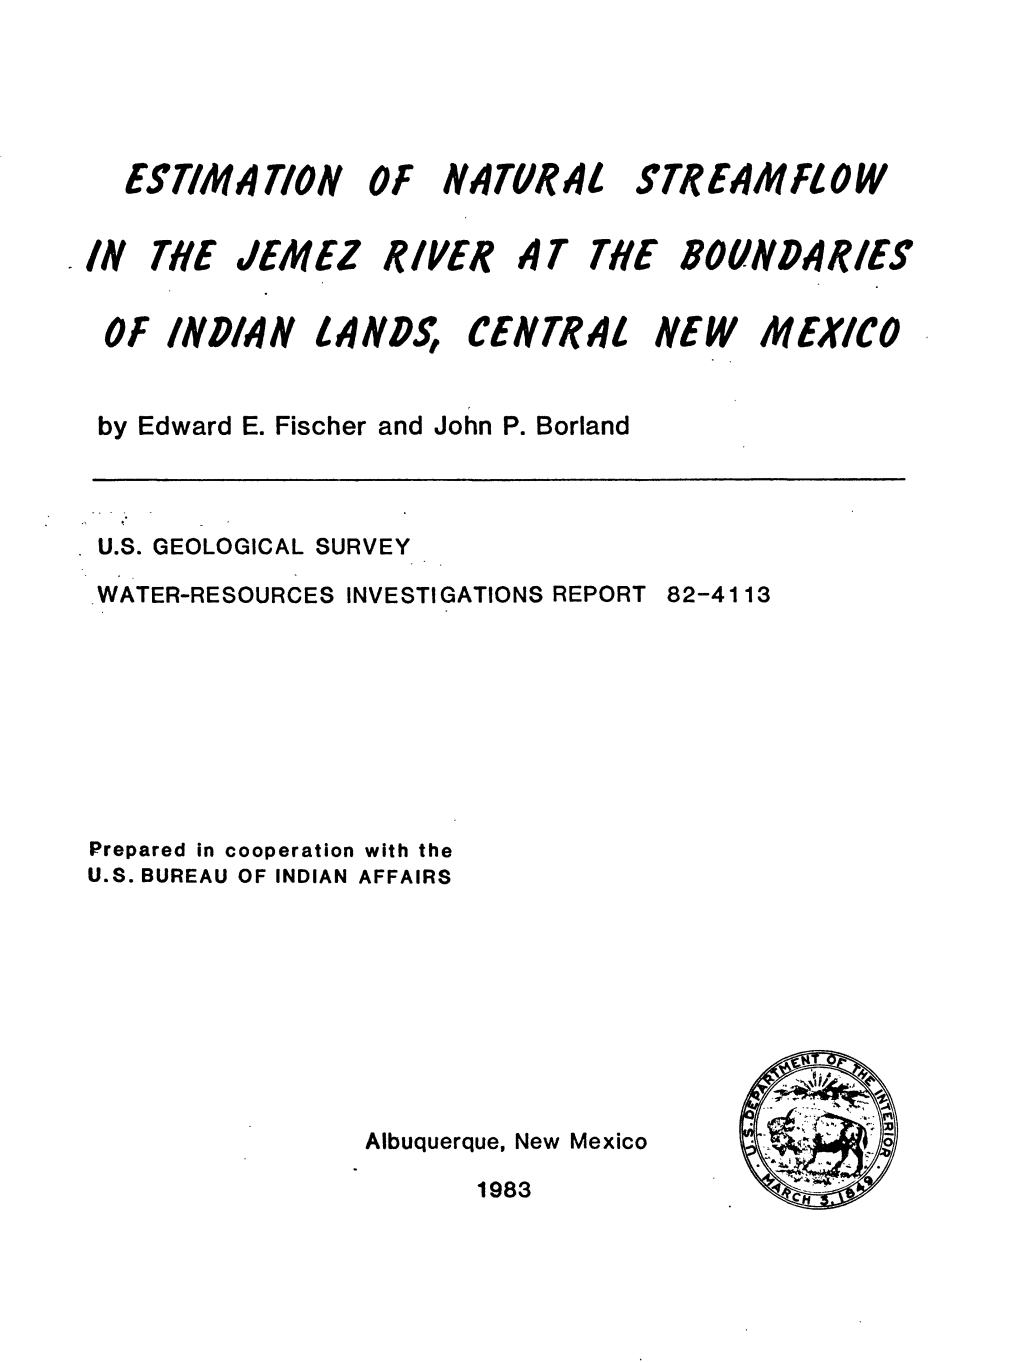 Estimation of Natural Streamflow in the Jemez River at the Boundaries of Indian Lands, Central New Mexico